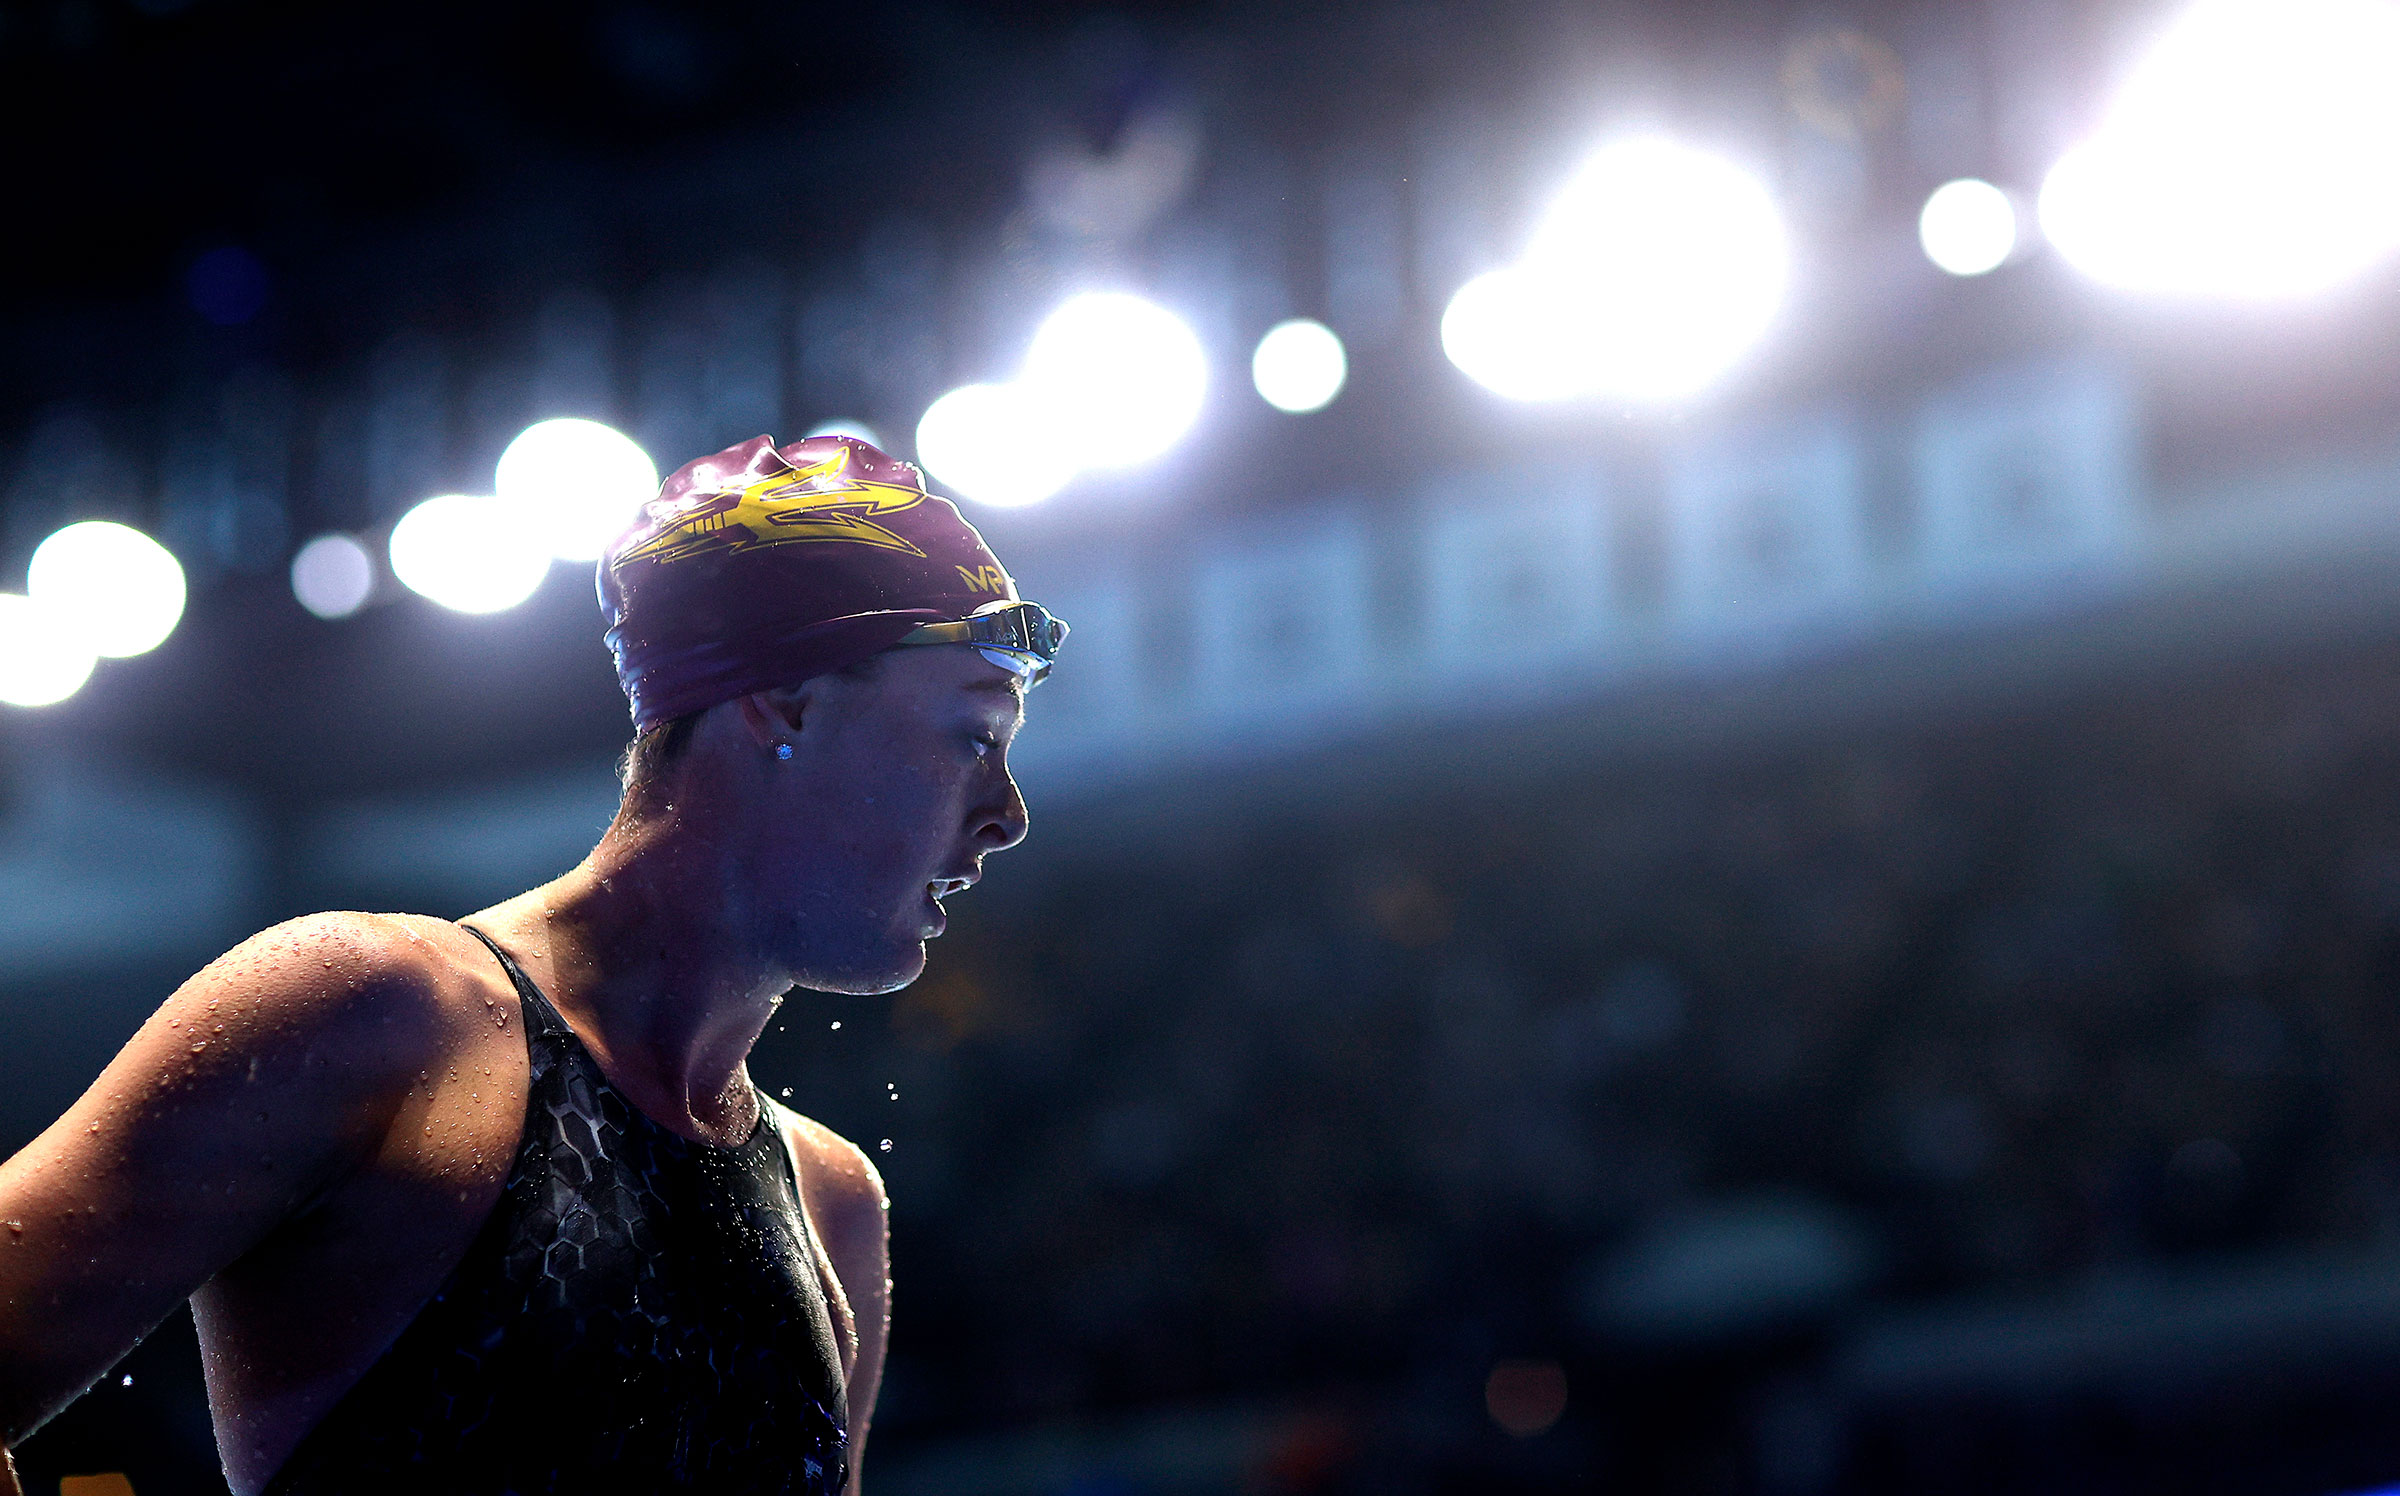 Allison Schmitt of the United States competes in a semifinal heat for the Women's 100m freestyle during day five of the 2021 U.S. Olympic Team Swimming Trials in Omaha, Nebr. on June 17, 2021. (Maddie Meyer—Getty Images)